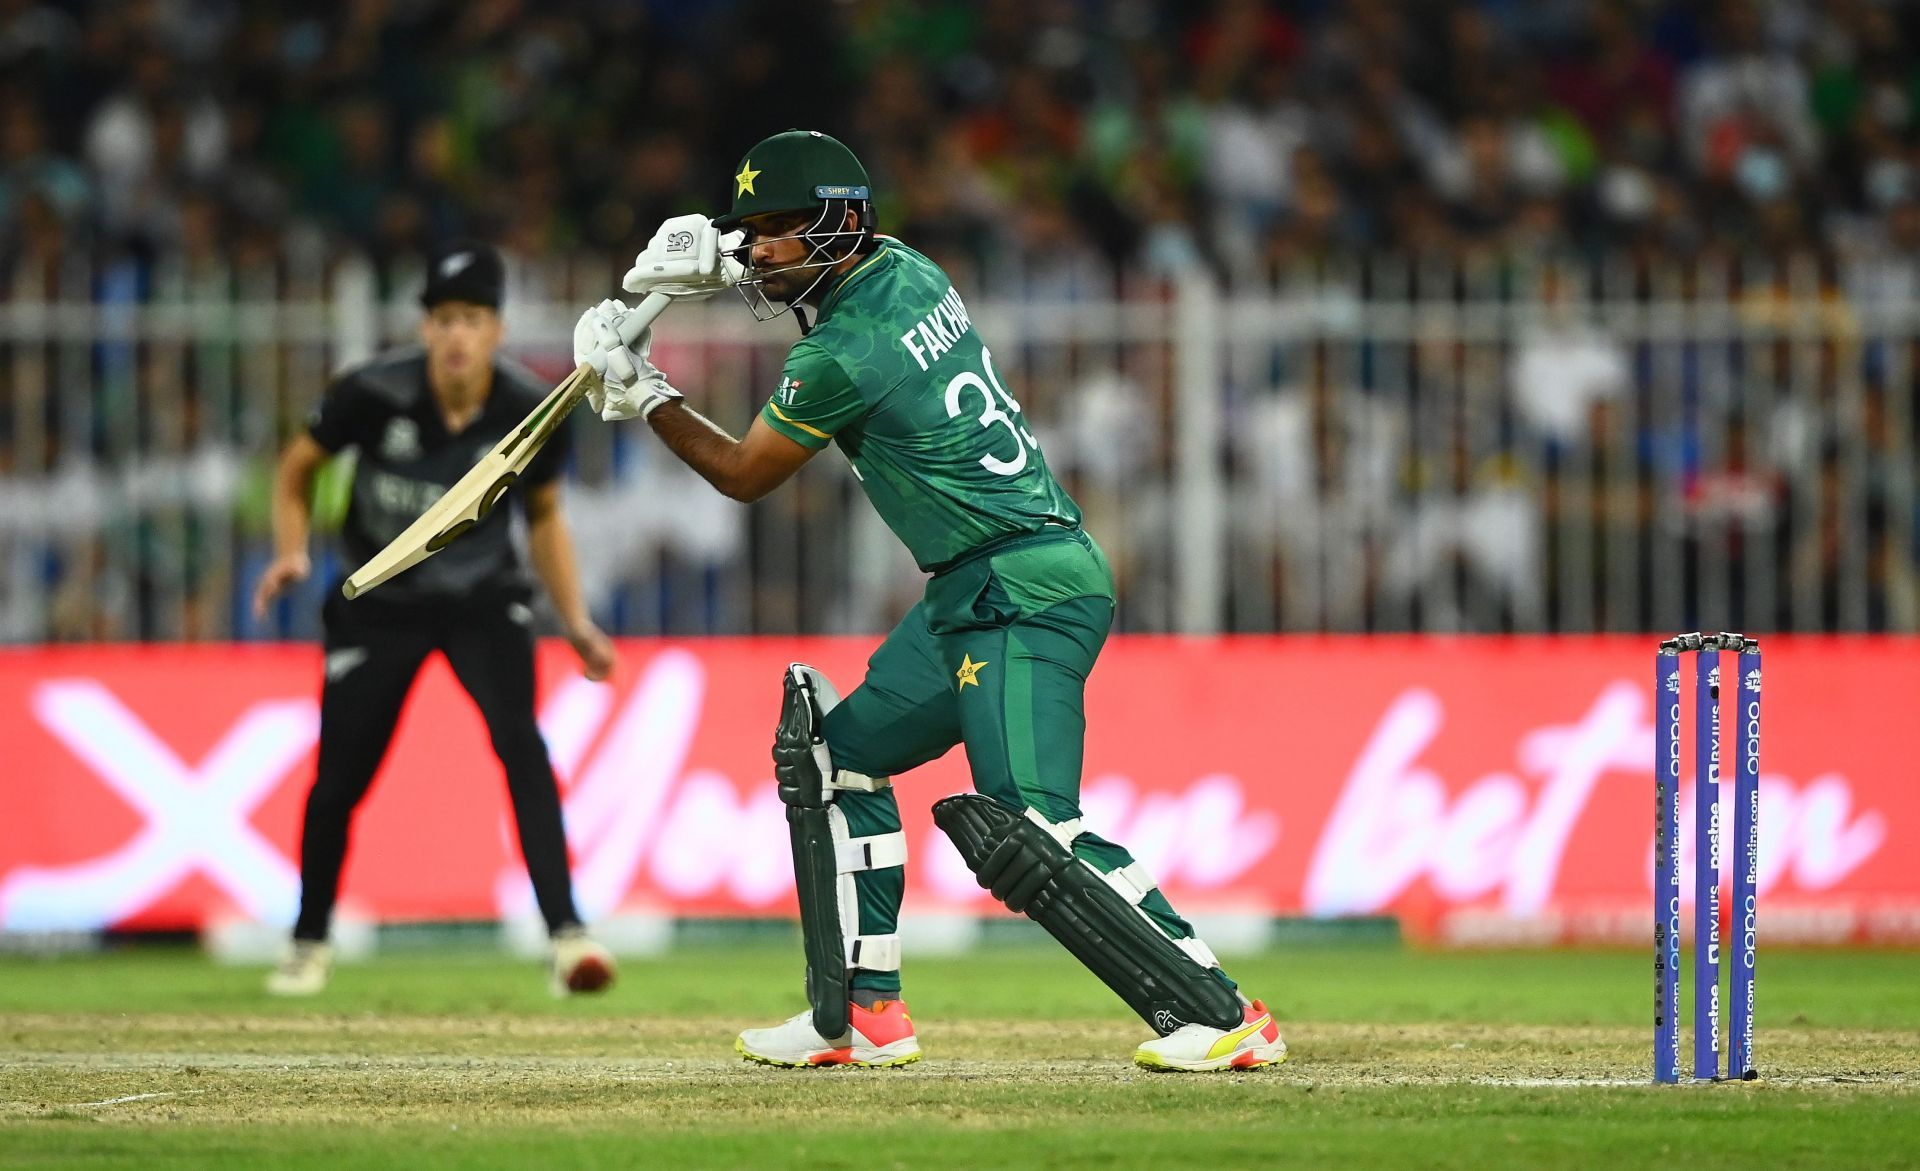 Fakhar Zaman will need to find his form for Pakistan to be confident ahead of the semis.